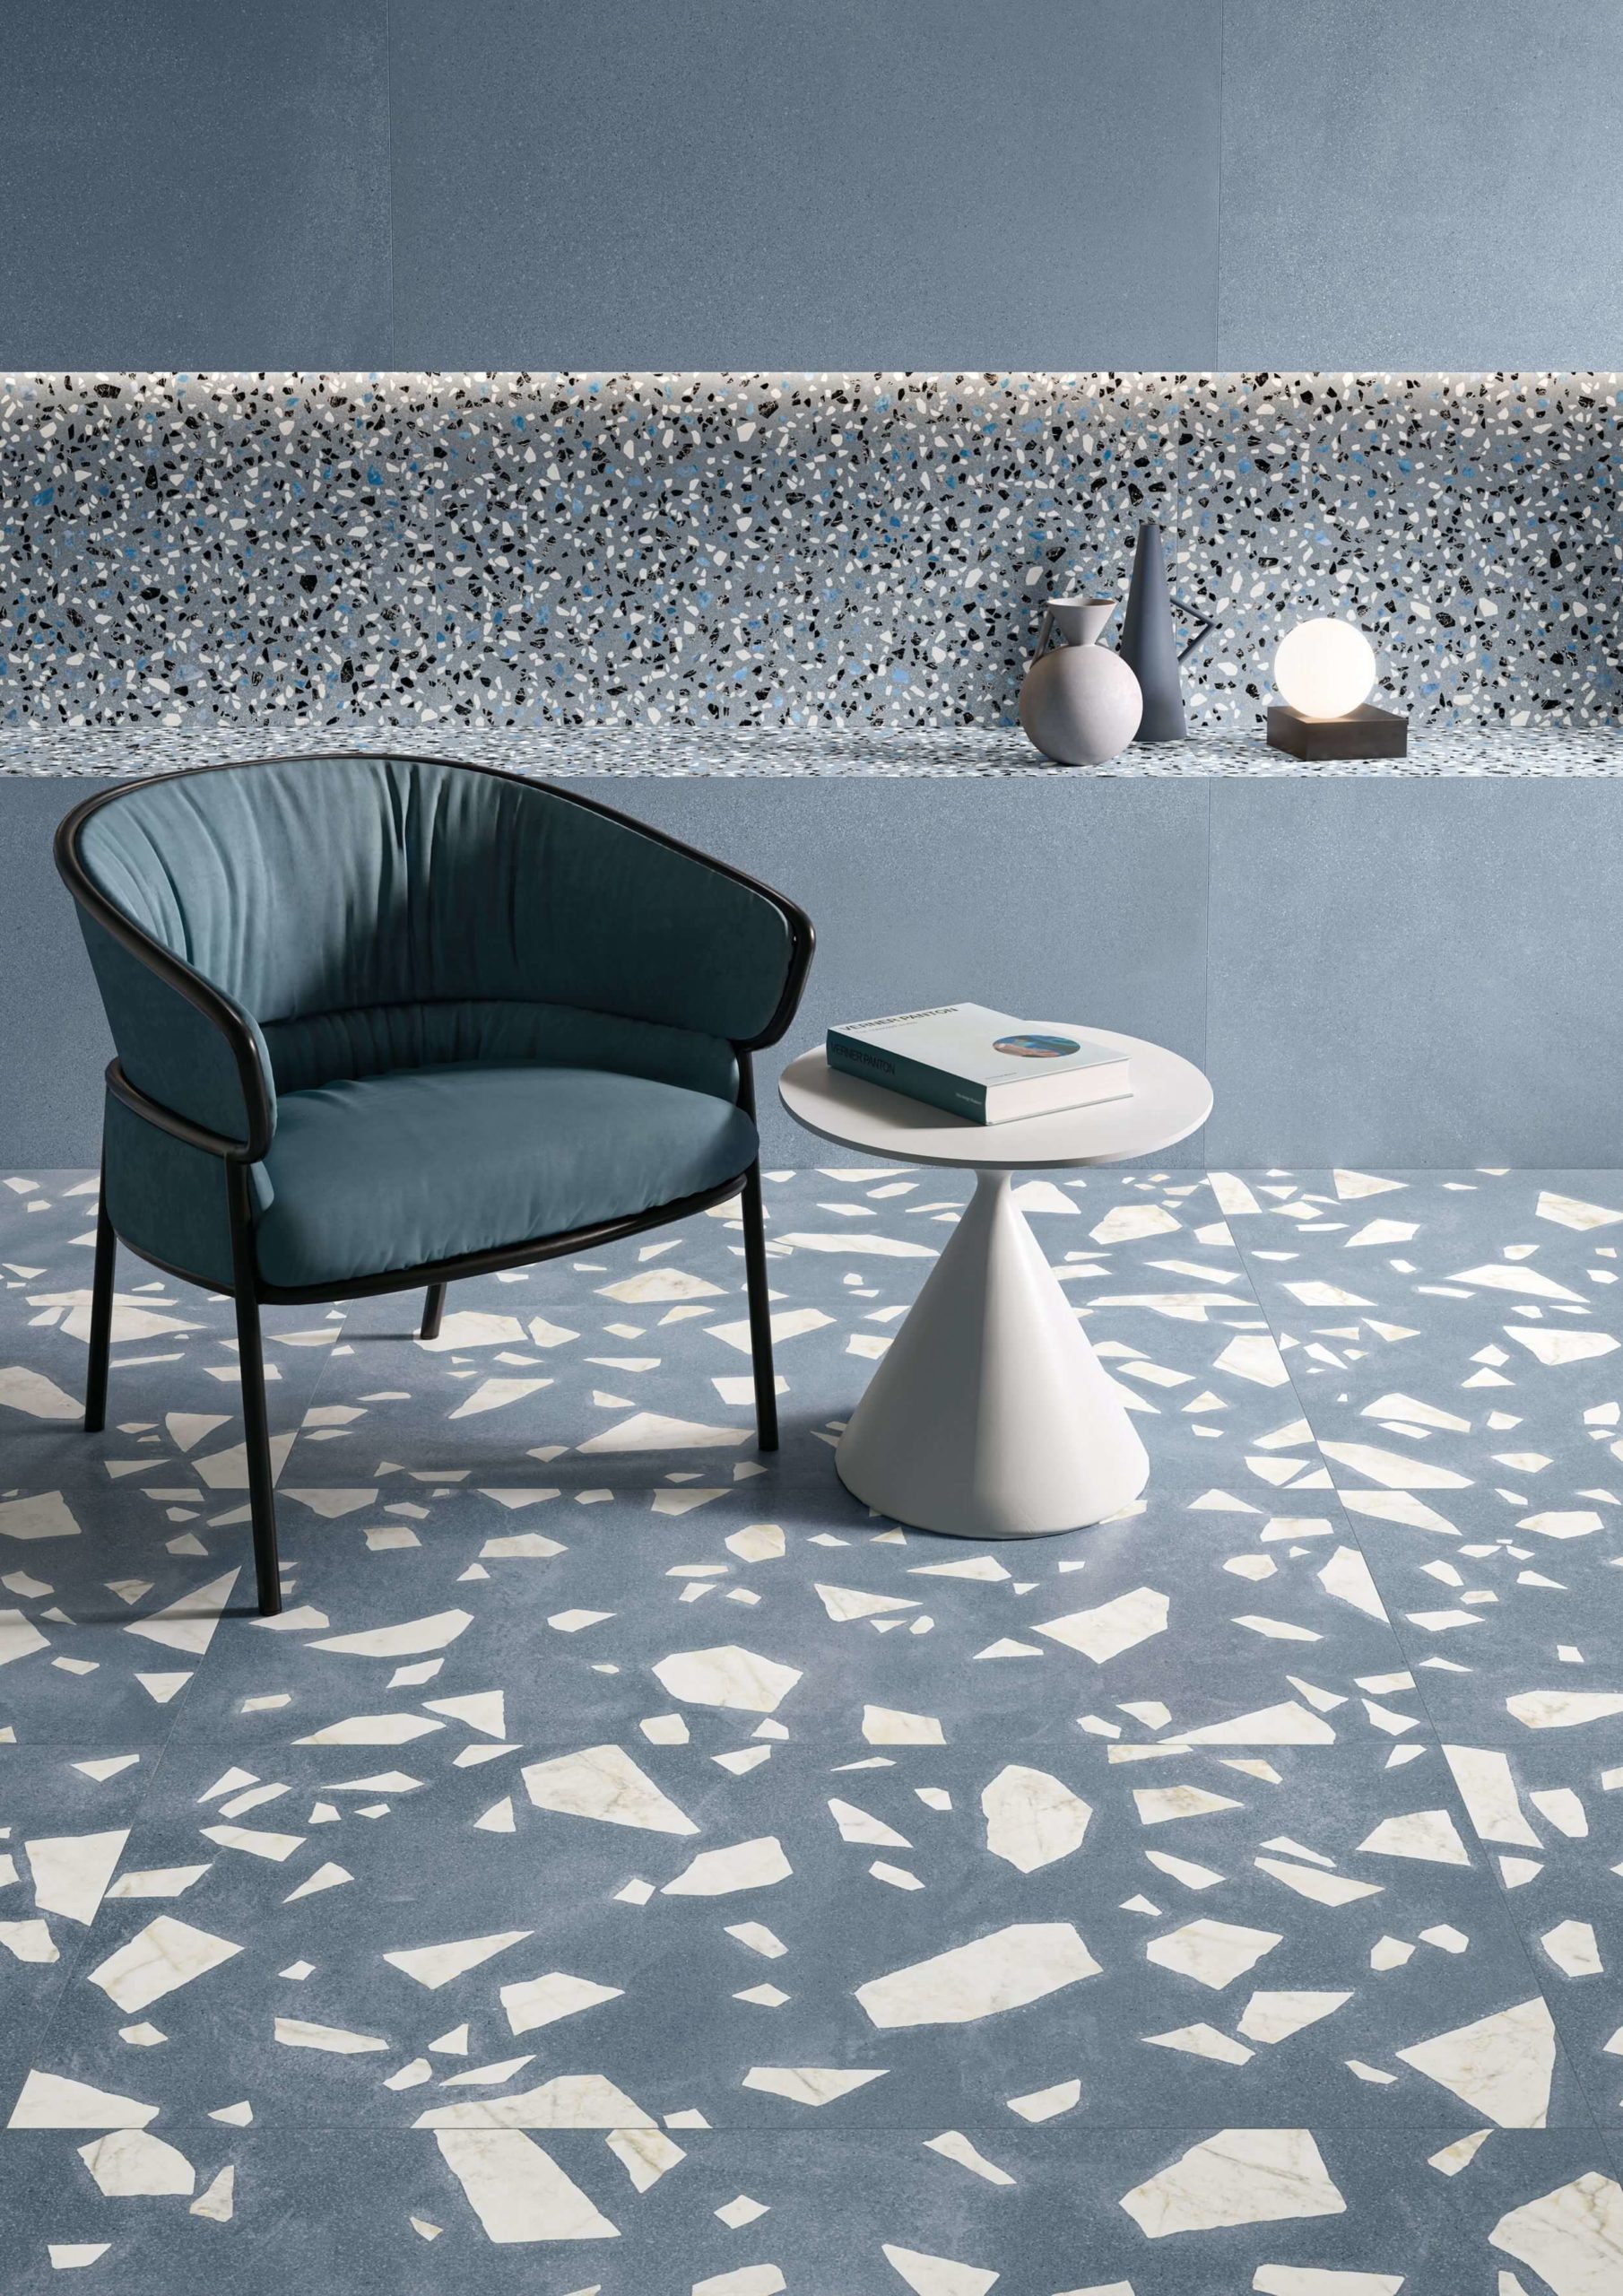 Terrazzo Designs That Are Hot Right Now